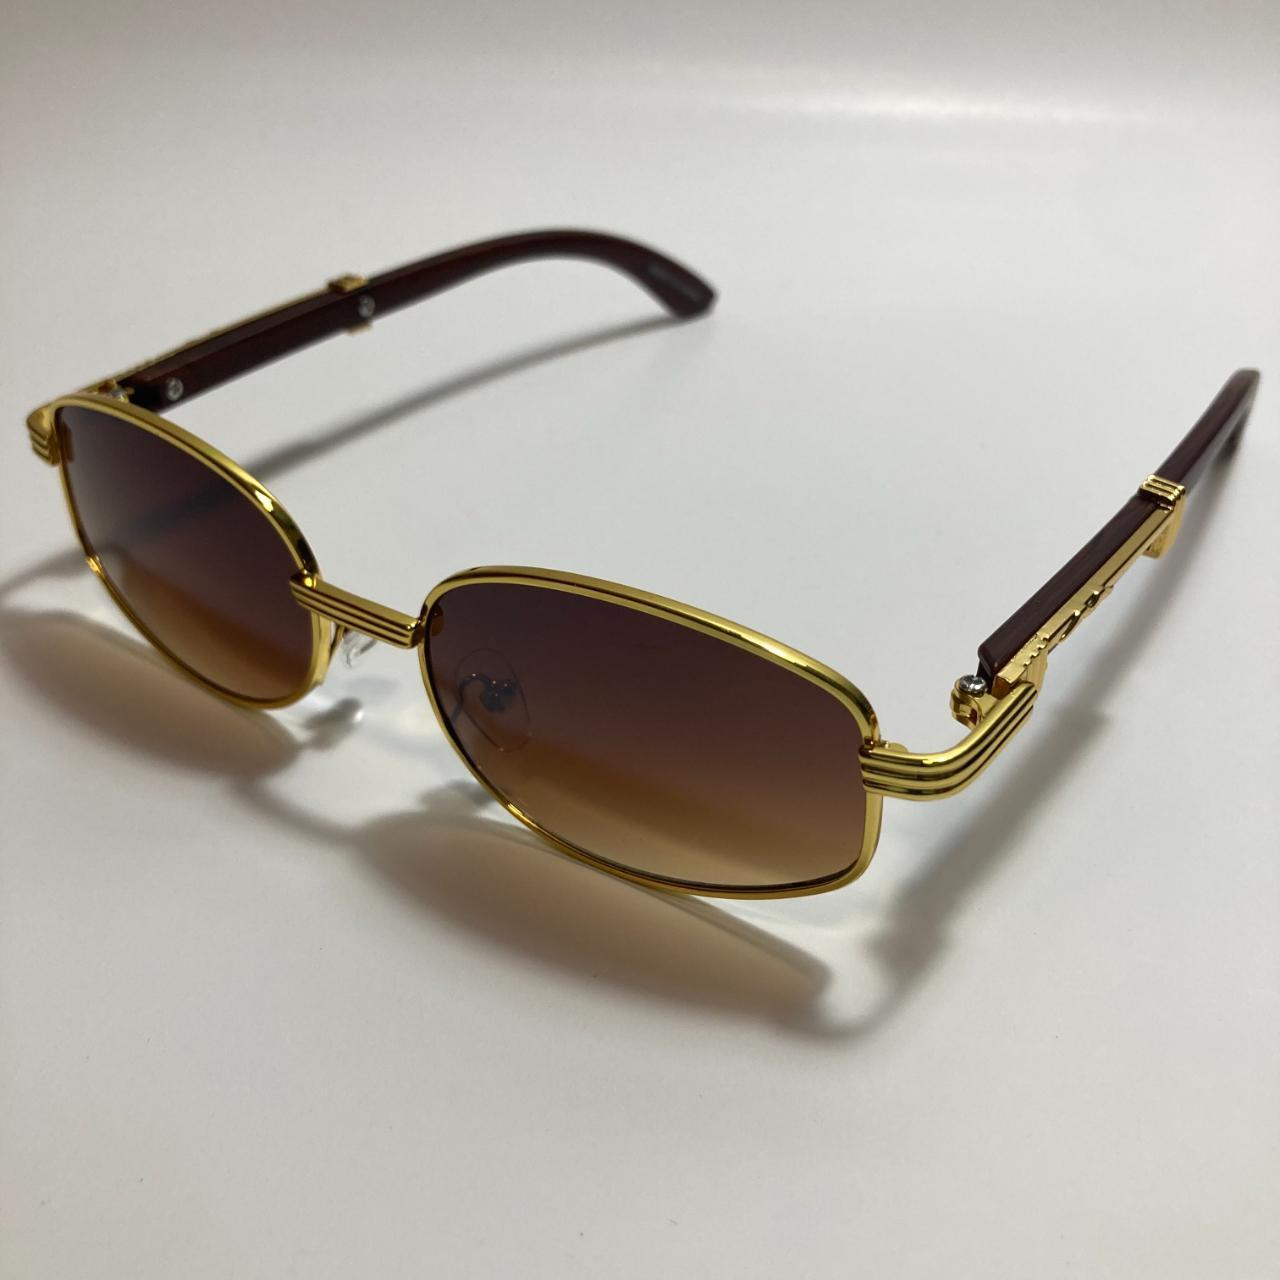 Women's Brown and Gold Sunglasses